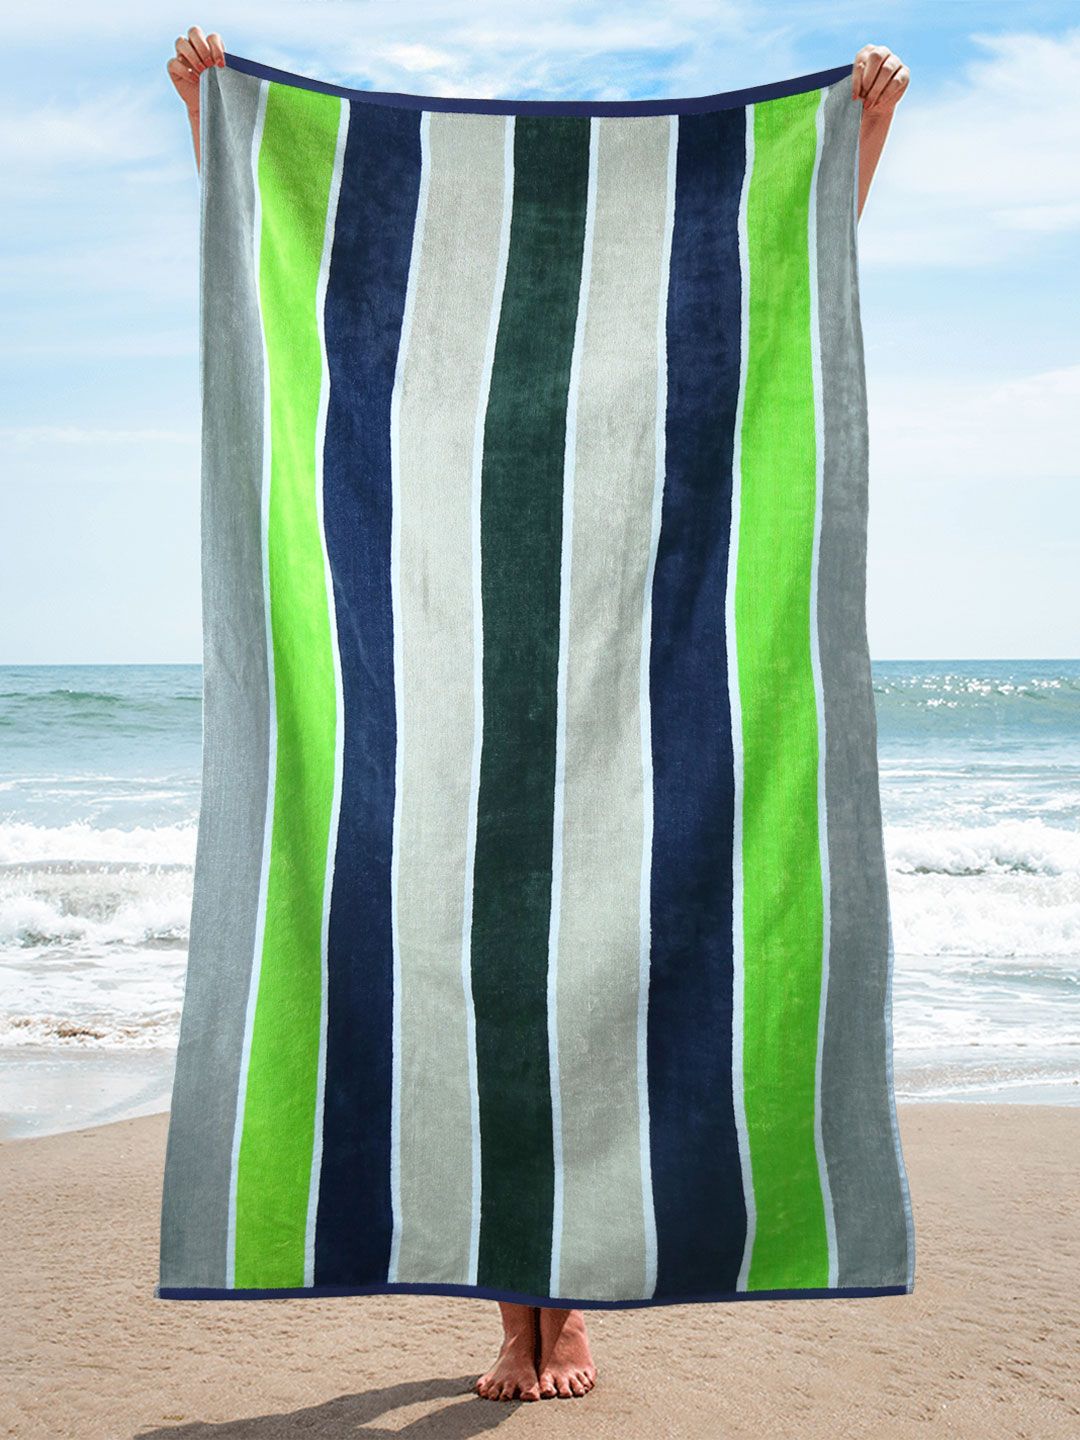 Trident Green Striped 500 GSM Cotton Bath Towels Price in India